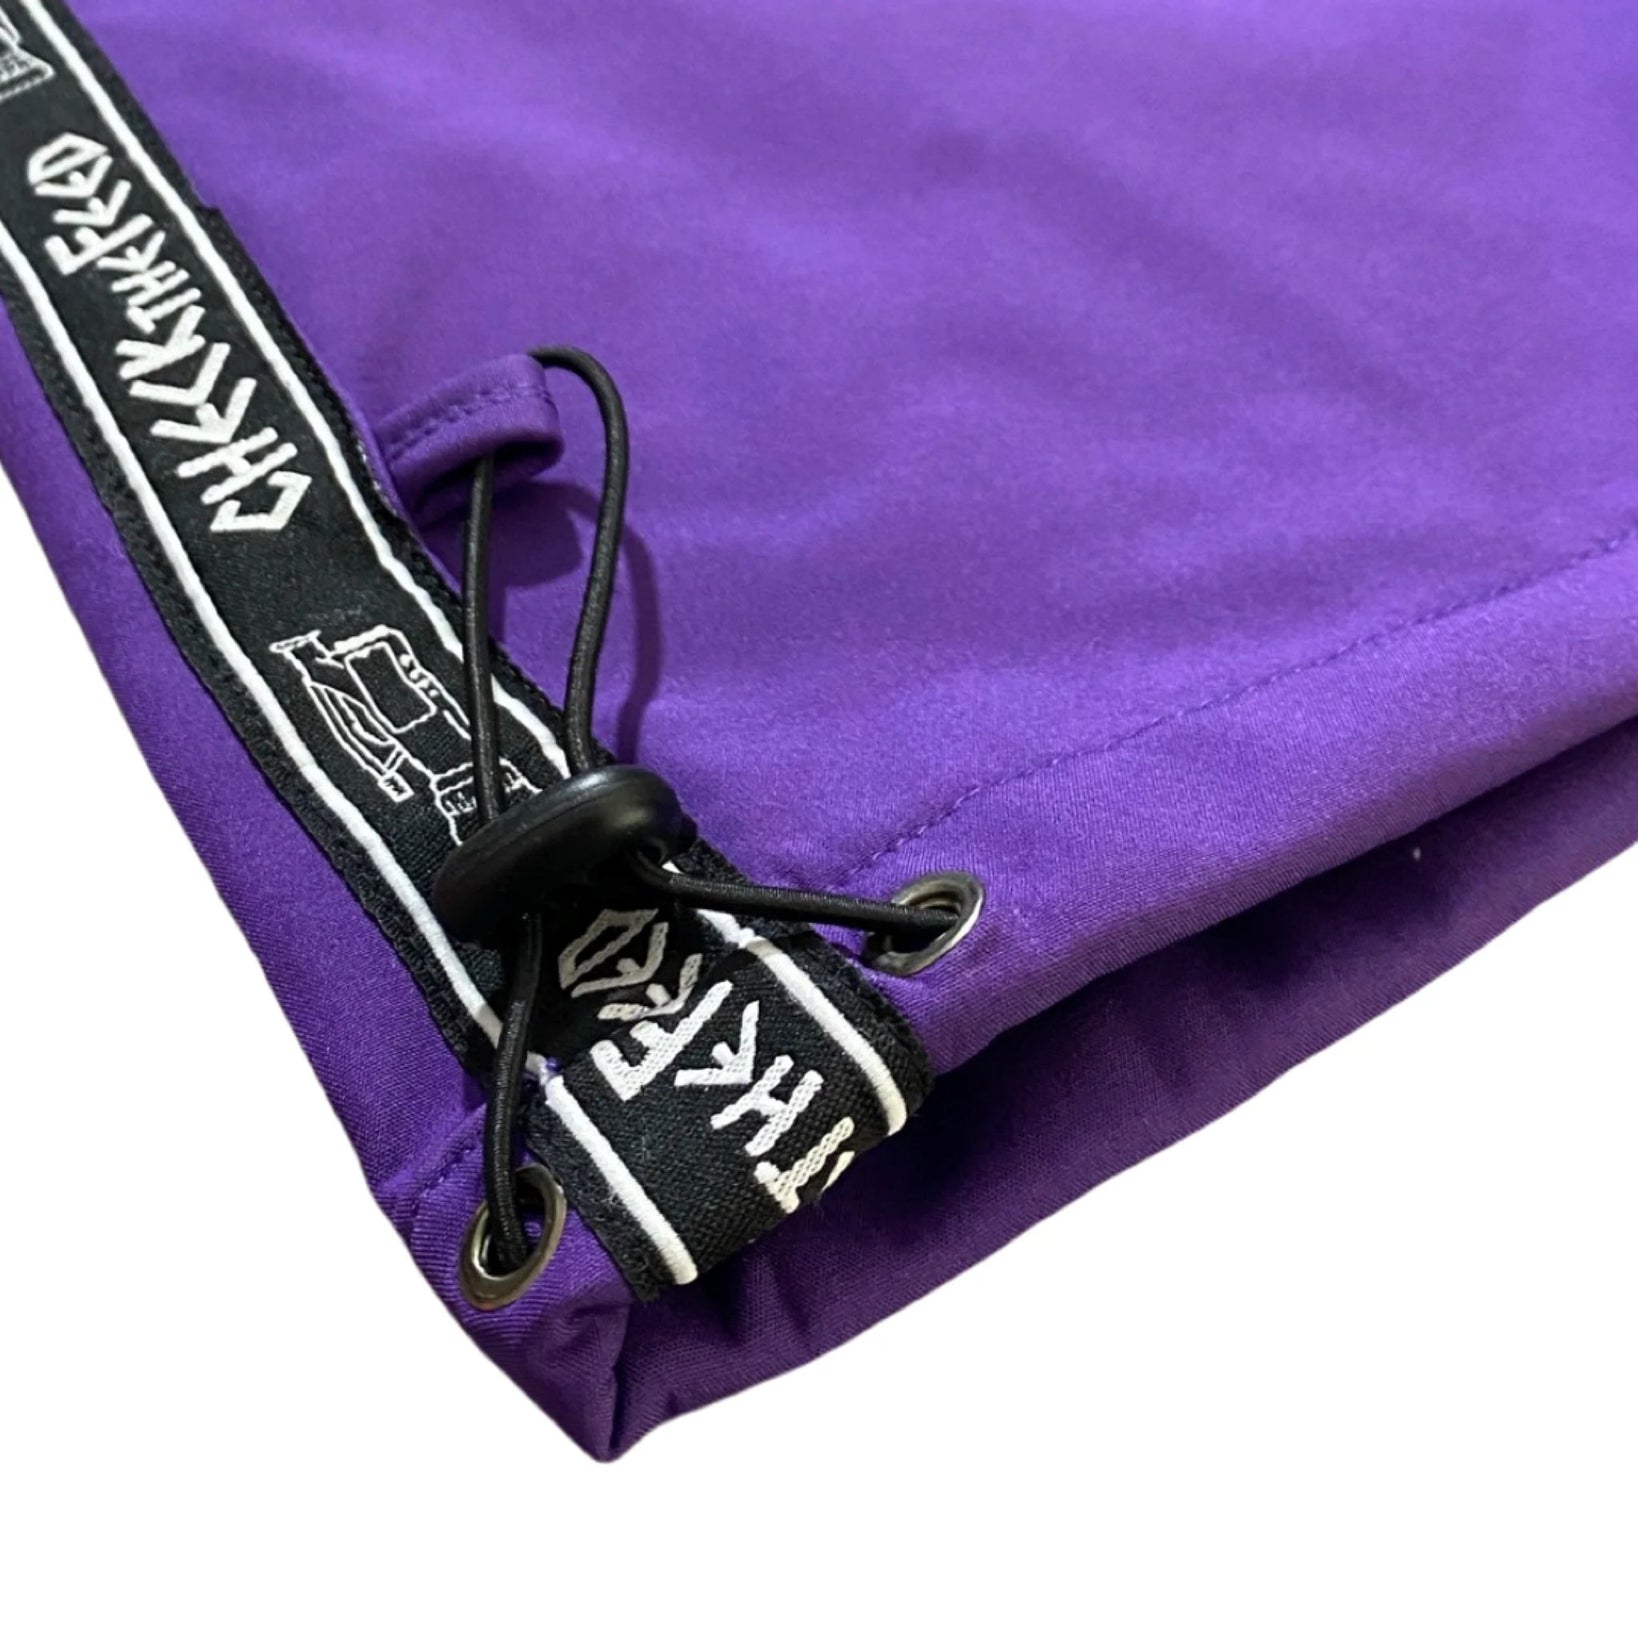 CHECKtheFeed VX Park Pant Purple and Black - FULLSEND SKI AND OUTDOOR